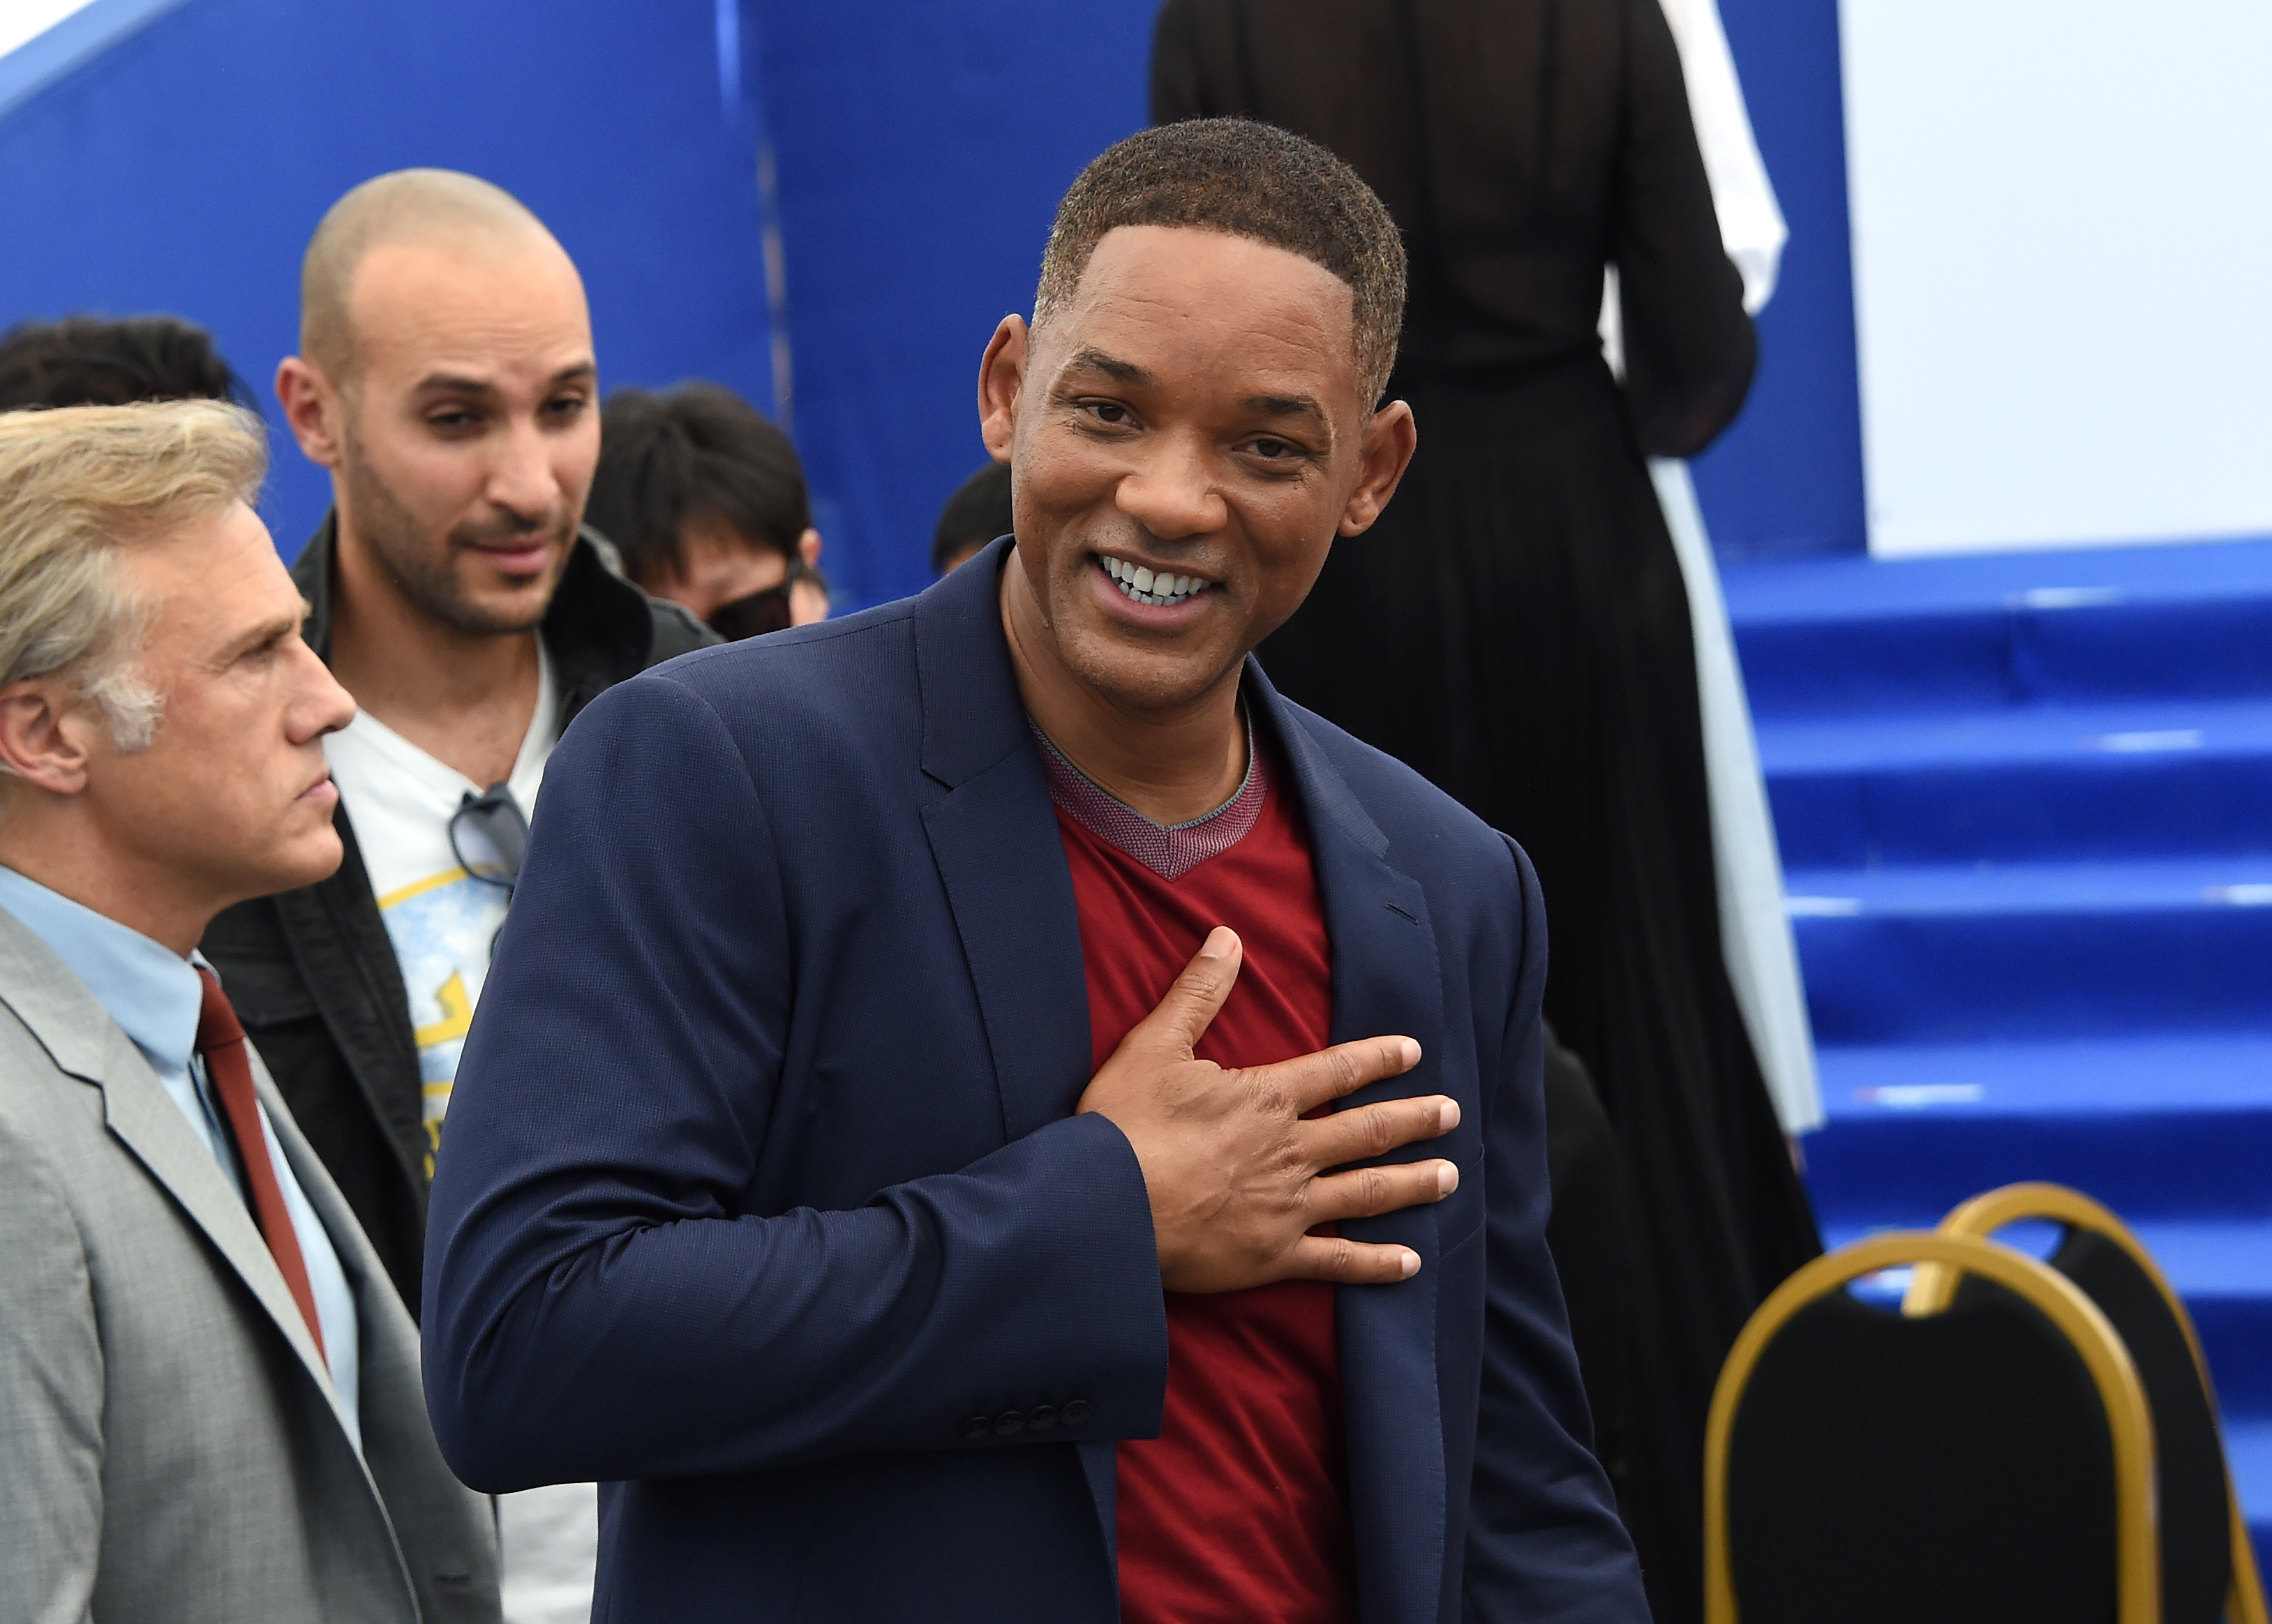 Will Smith attends the 70th Anniversary Photocall during the 70th annual Cannes Film Festival at Palais des Festivals.